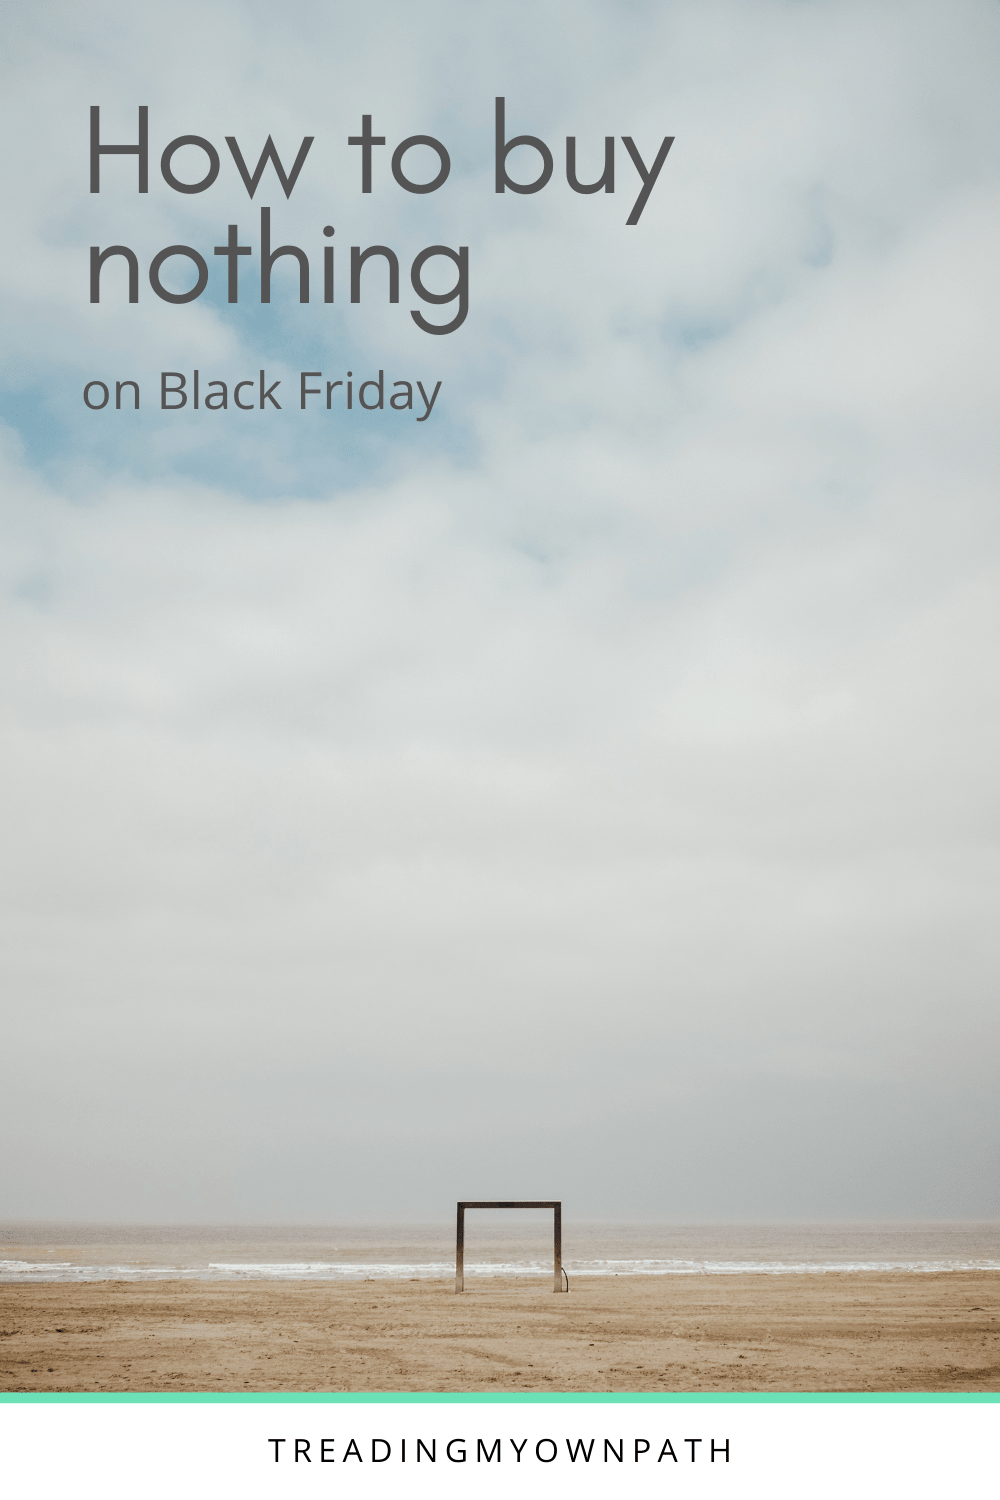 How to buy nothing on Black Friday